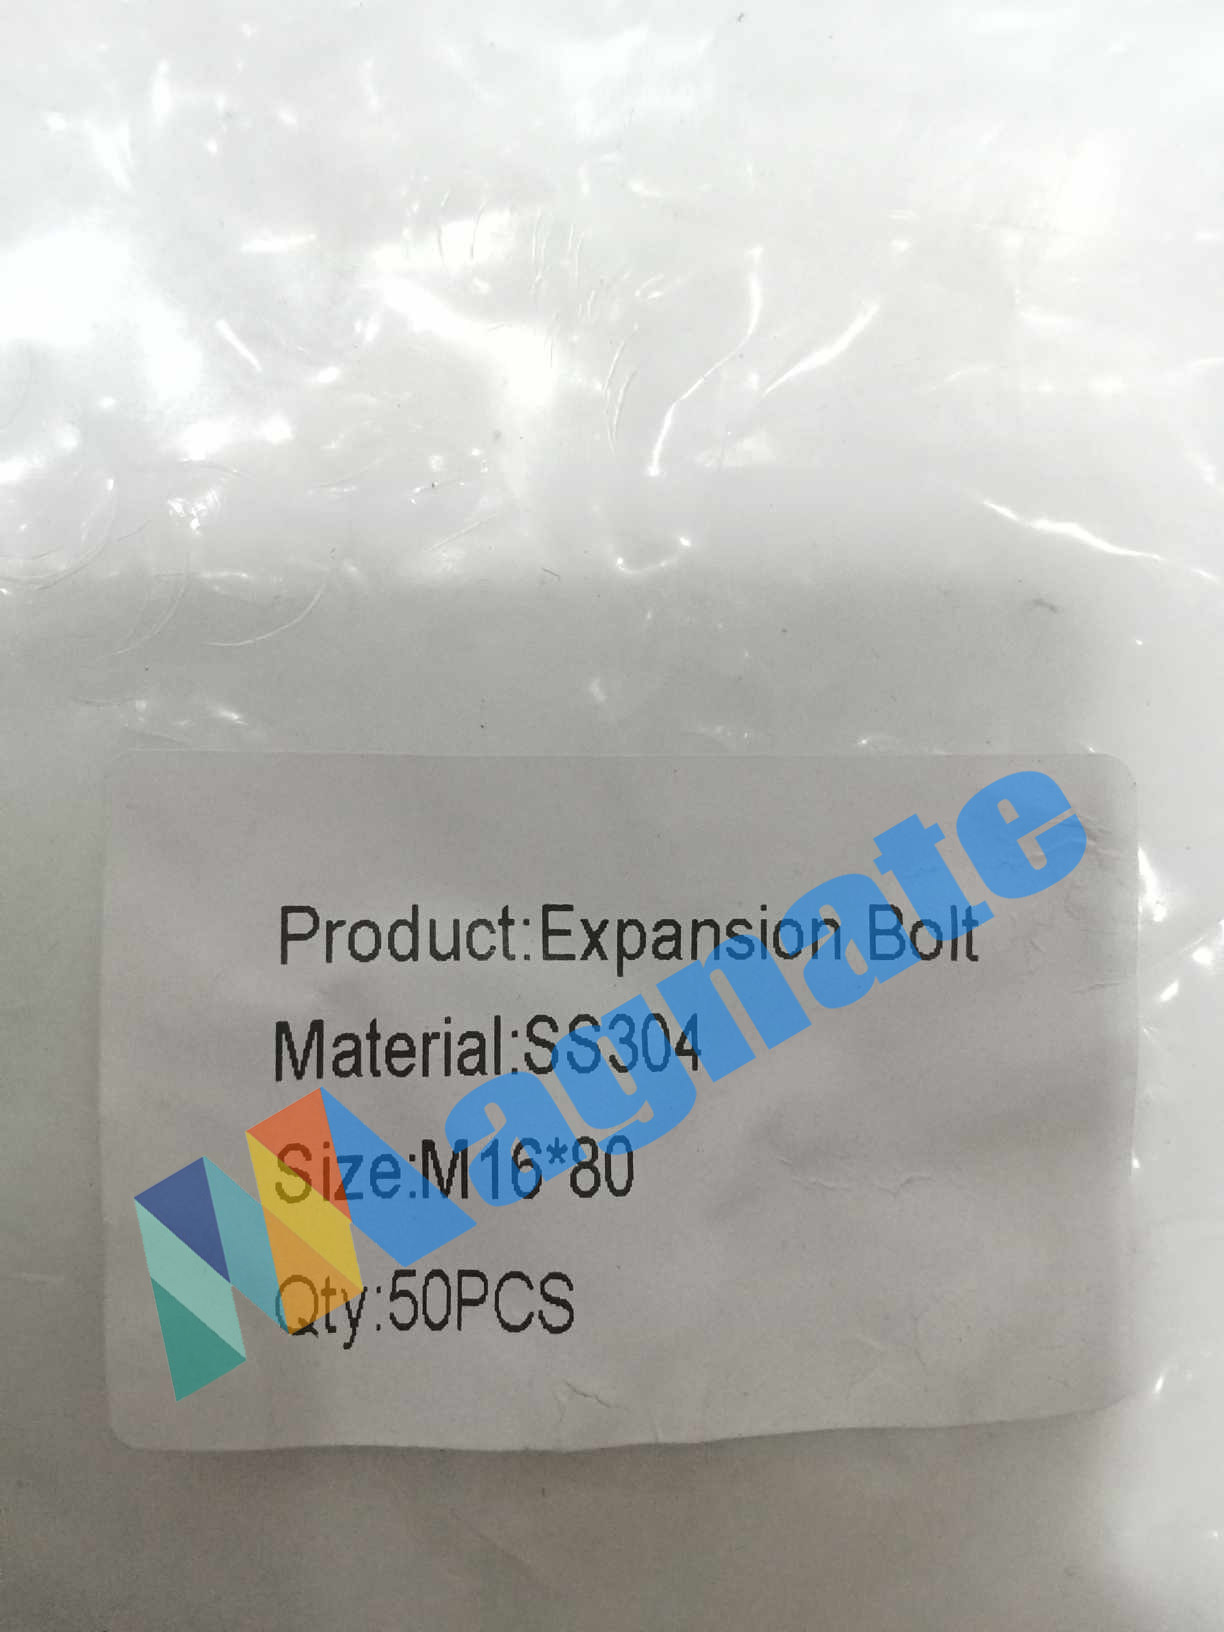 Expansion Bolt Material: SS304 Size: M16*80